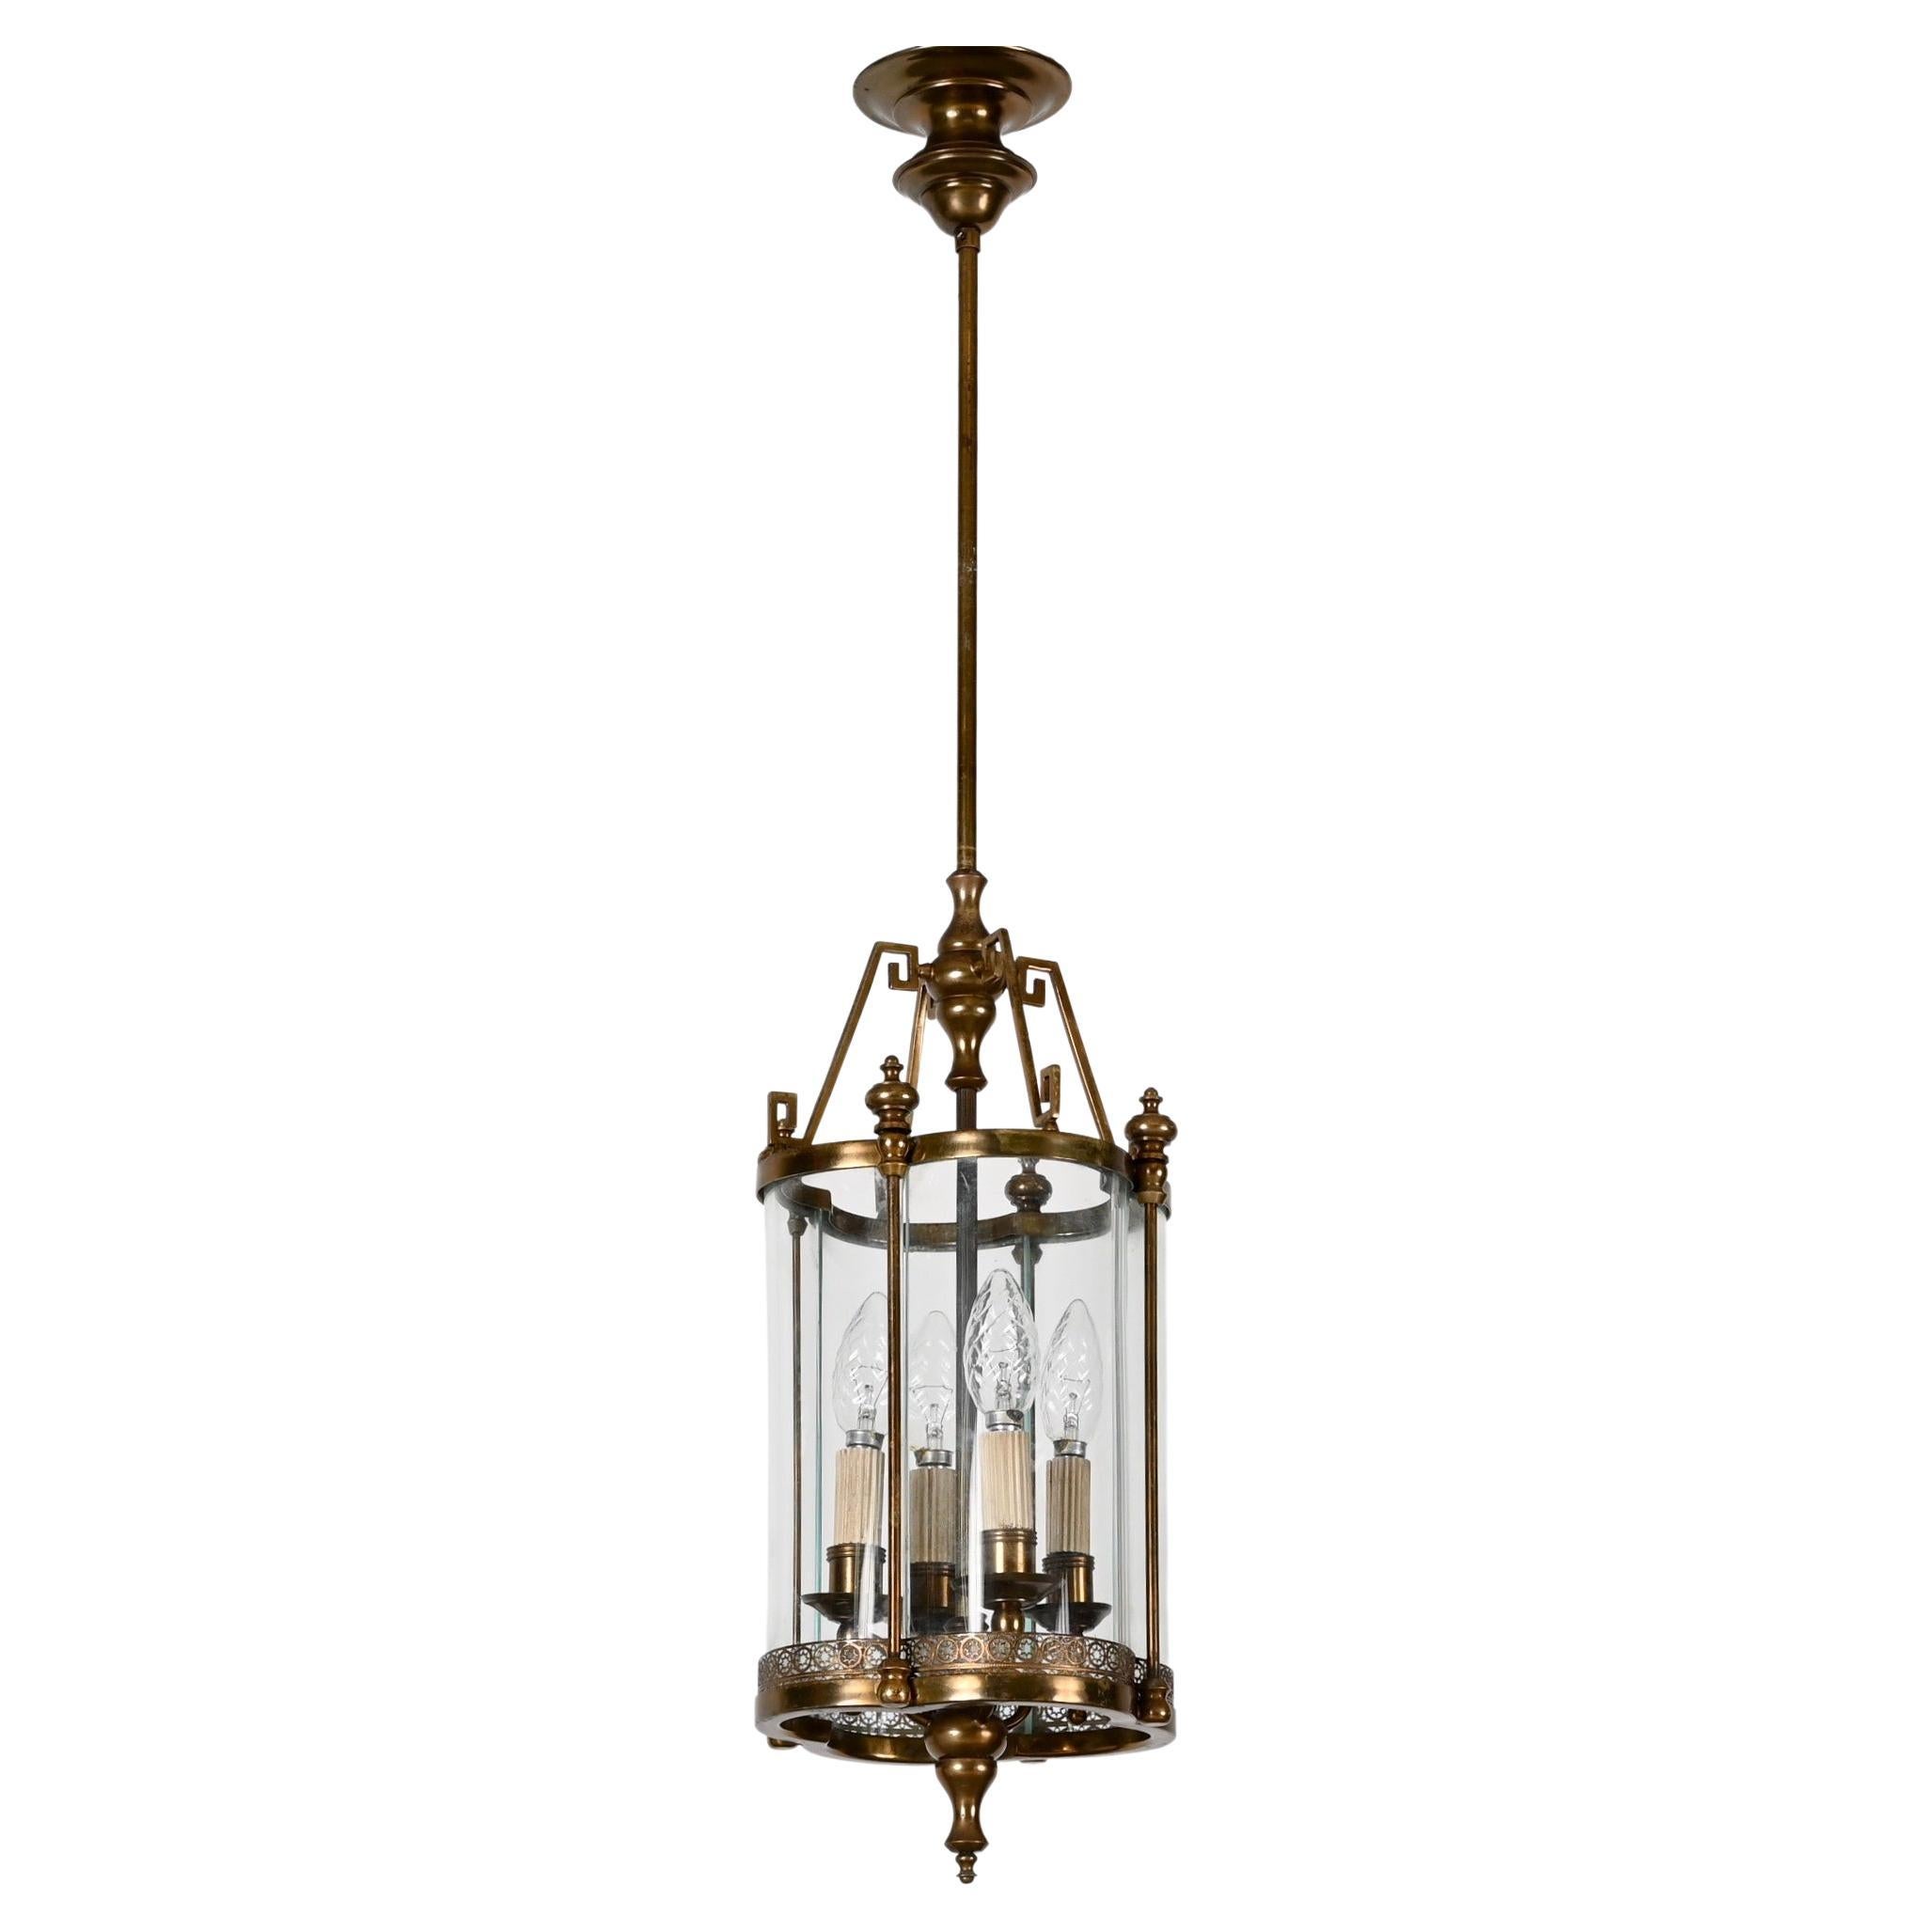 Art Deco Brass and Semicircular Glass Italian Chandelier after Adolf Loos, 1950s For Sale